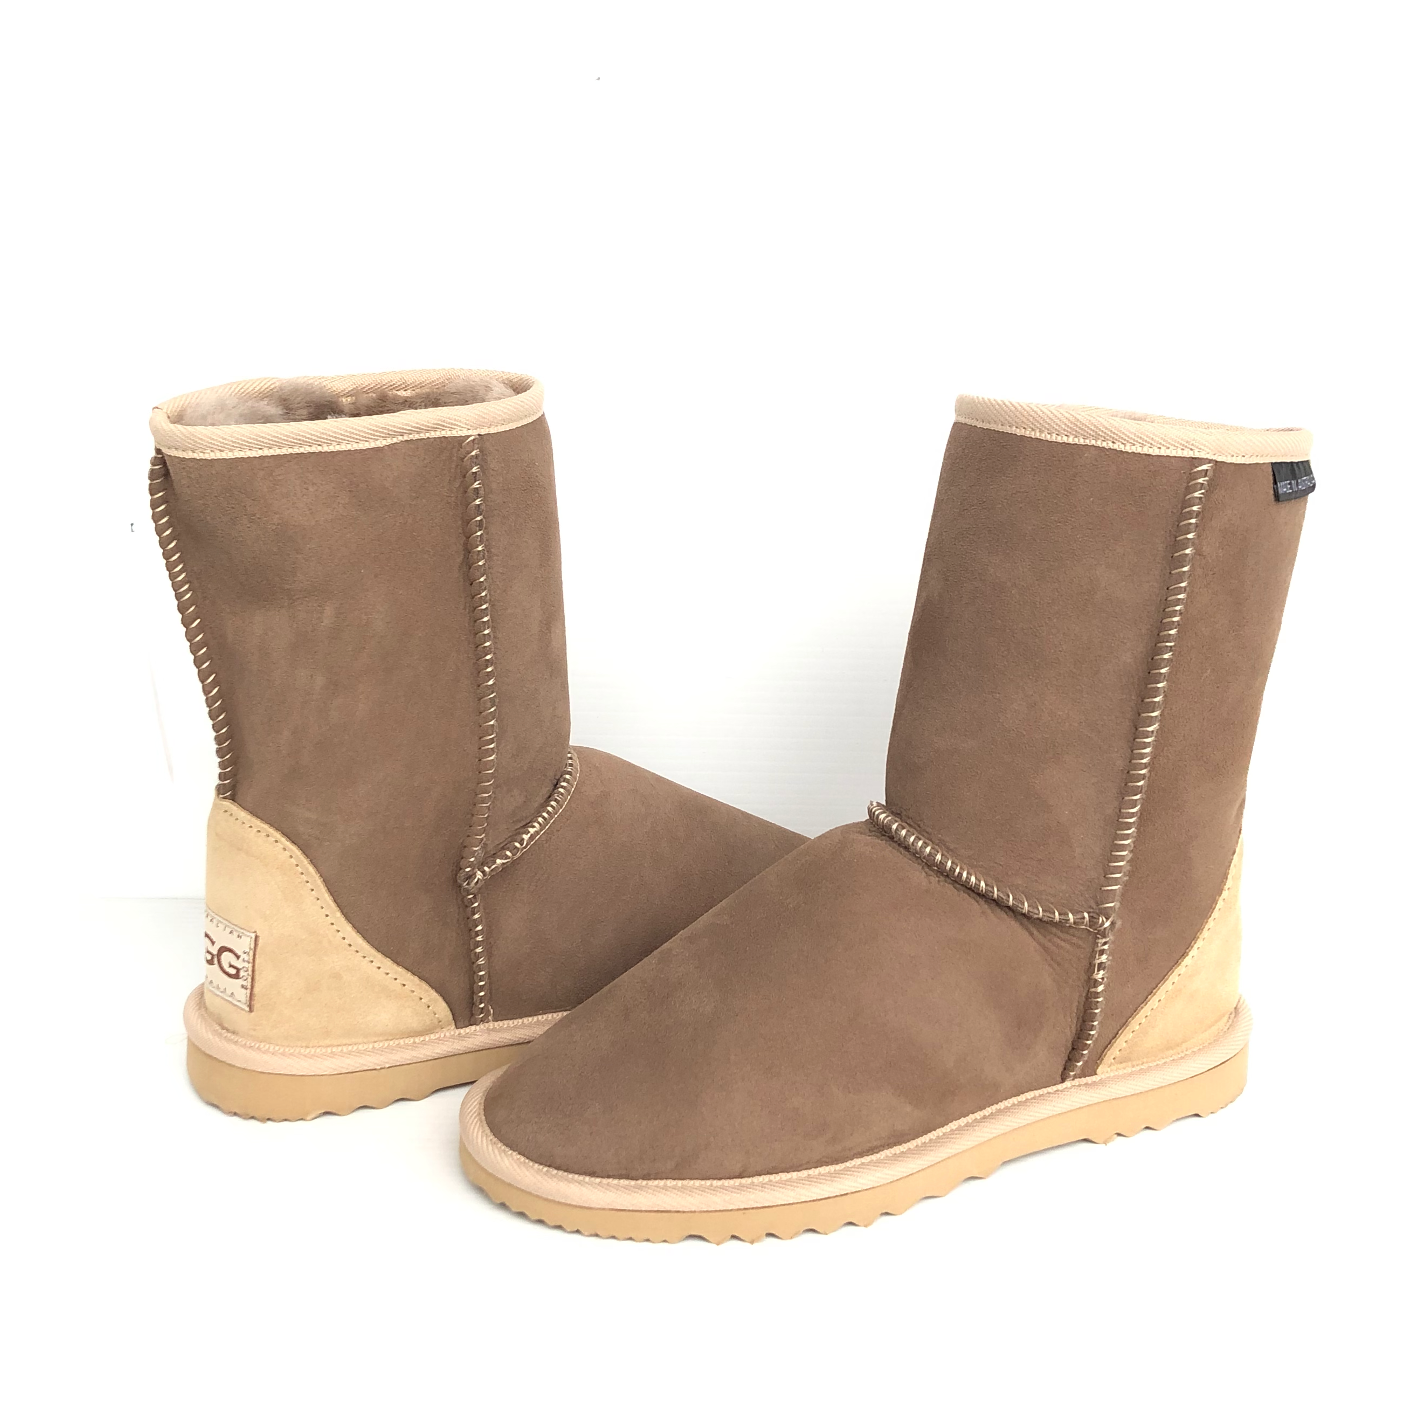 Pair of short ugg boots, chestnut brown colour with lighter brown - sand colour trims